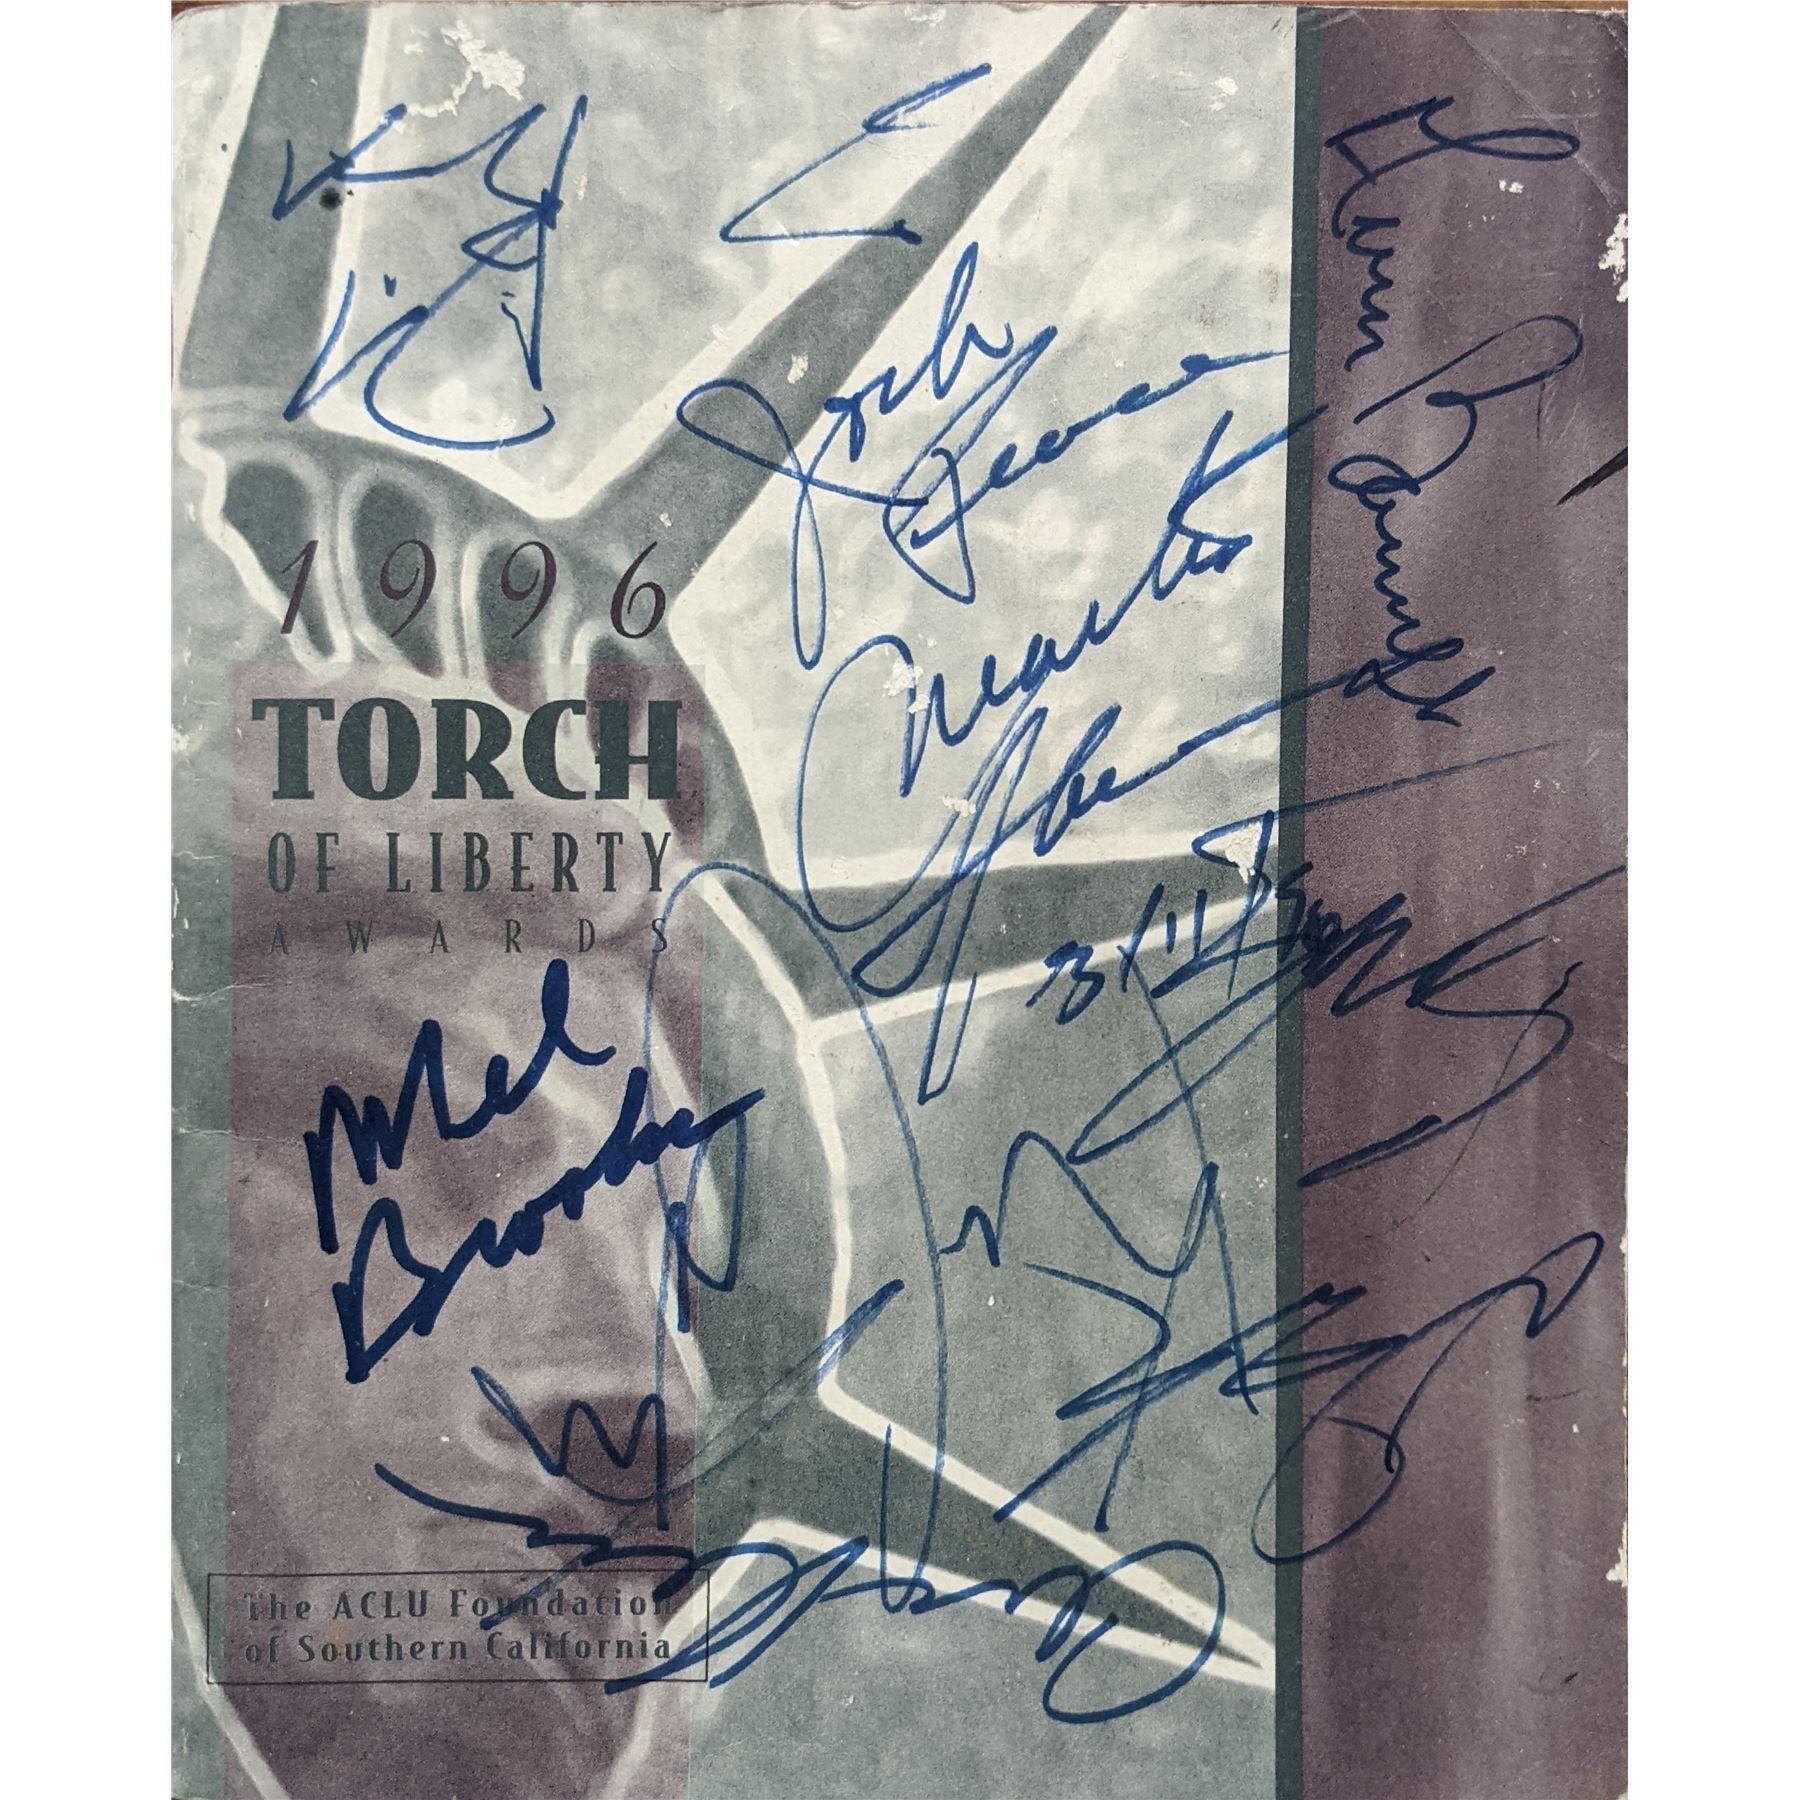 1996 Torch Of Liberty Awards Signed Program